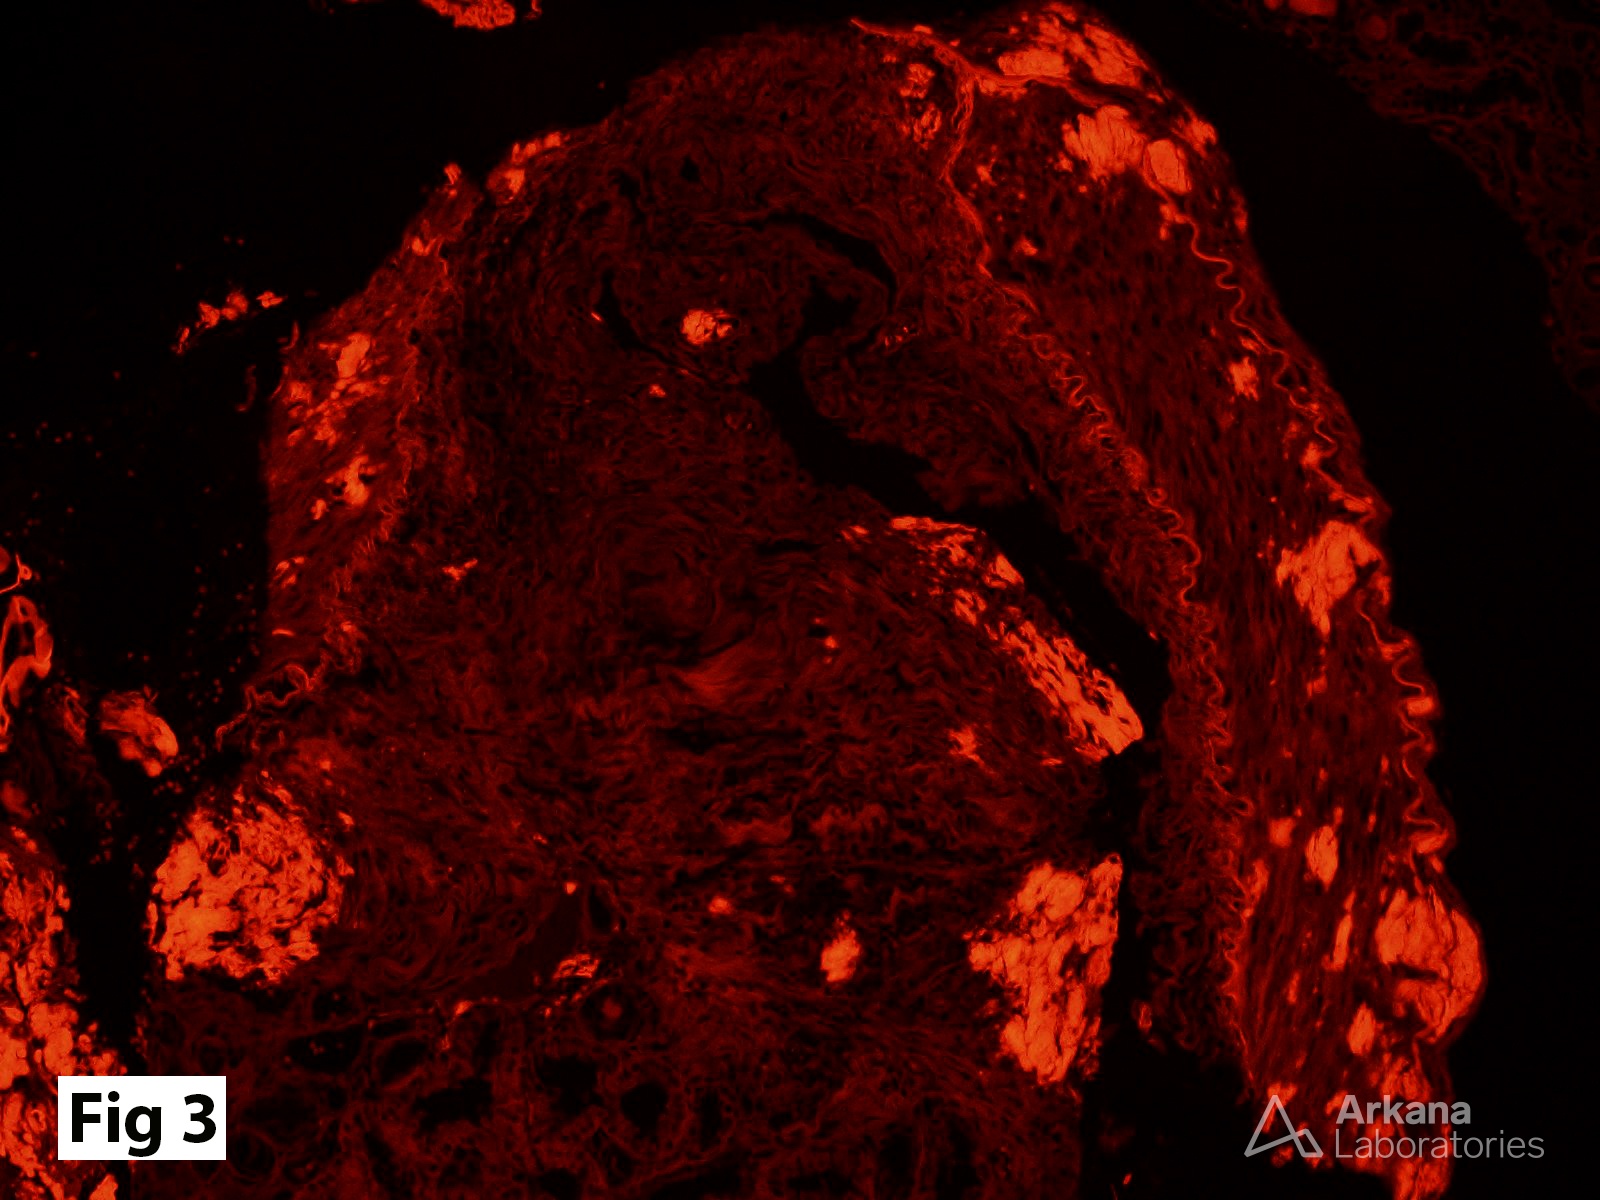 Congo red stain, fluorescence microscopy with Texas red filter